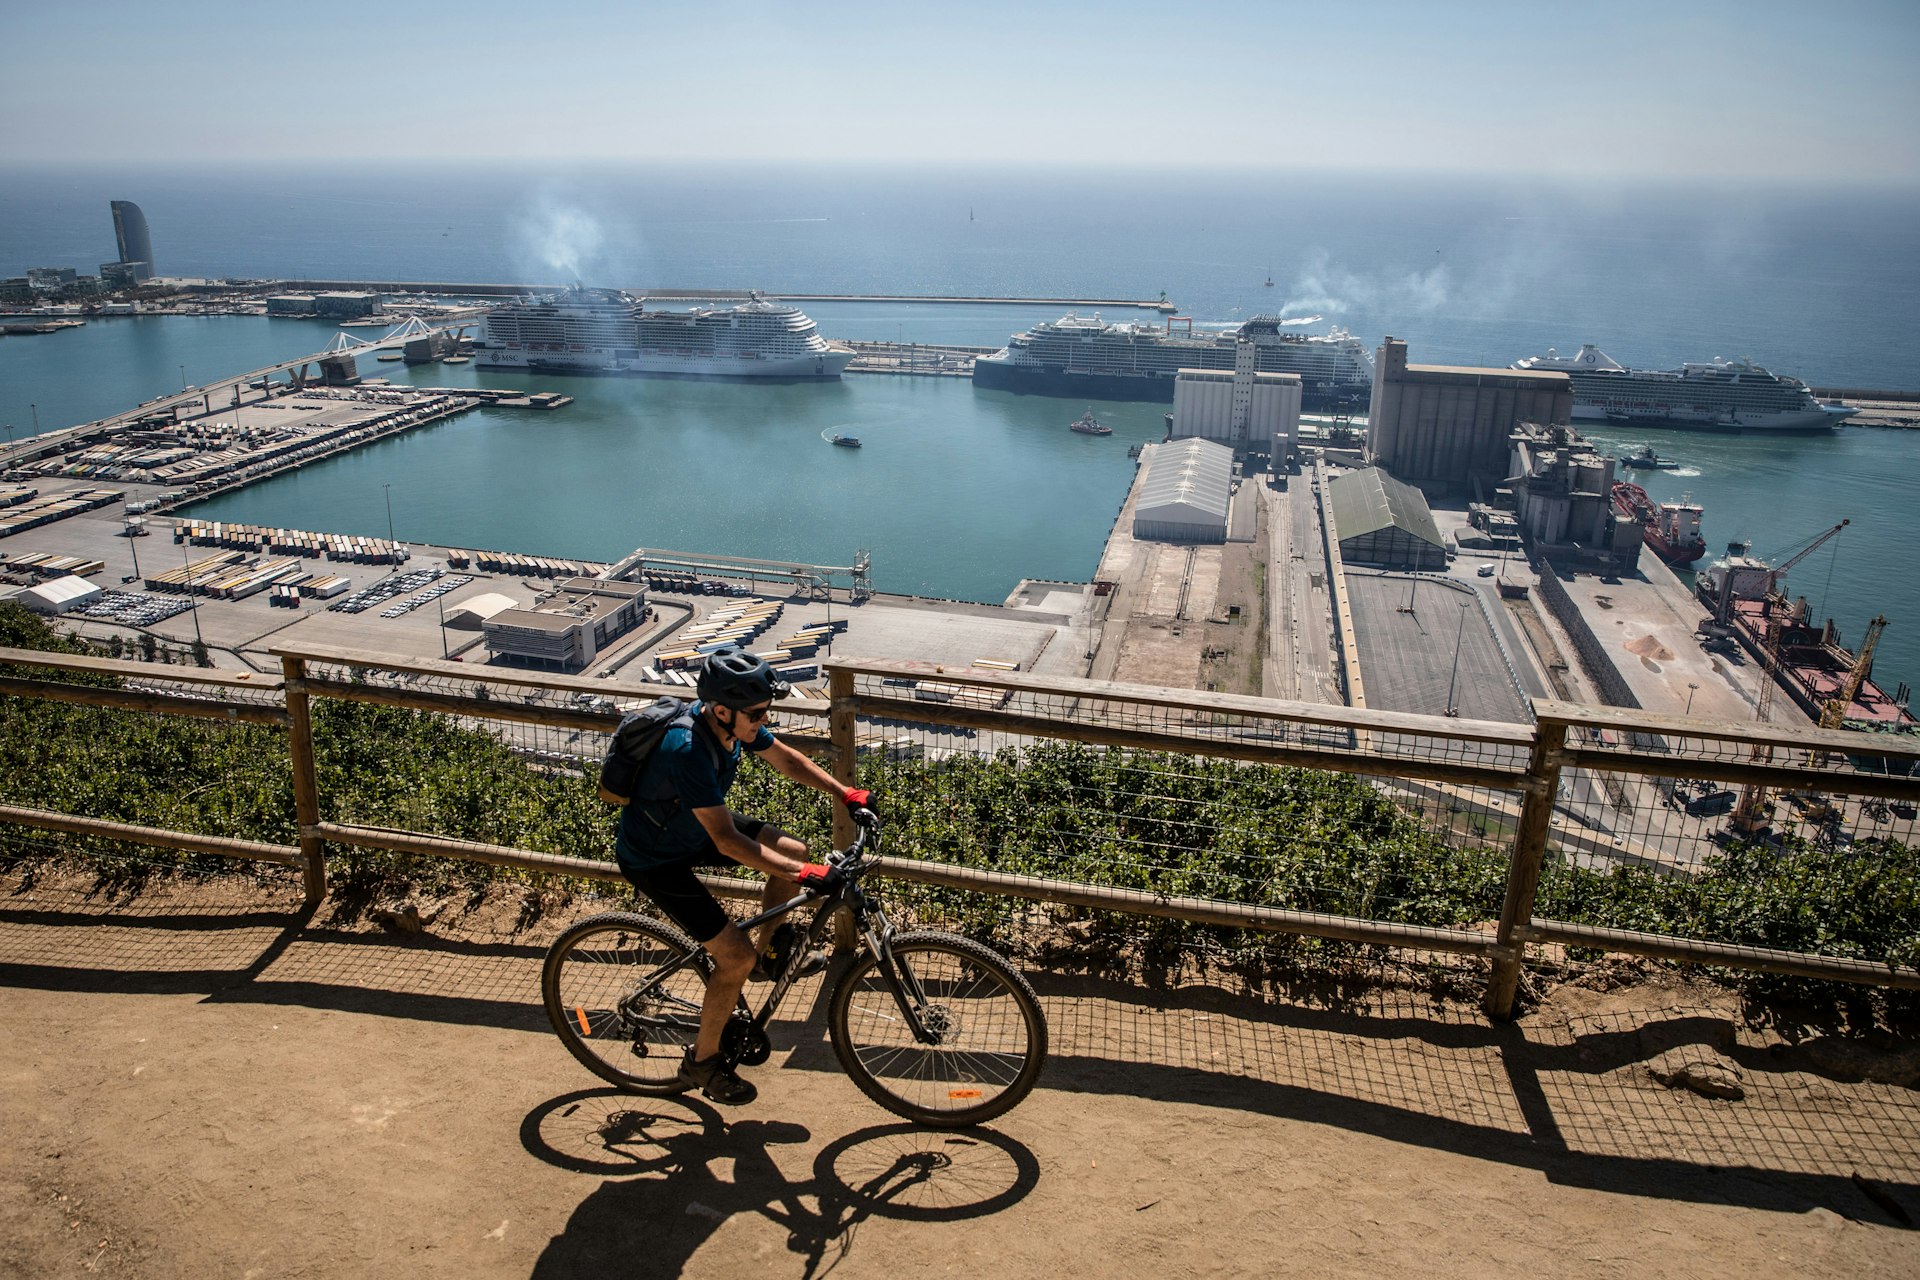 A cyclist rides along a viewpoint overlooking cruise ships docked at the Barcelona Cruise Terminal, Barcelona, Catalonia Spain